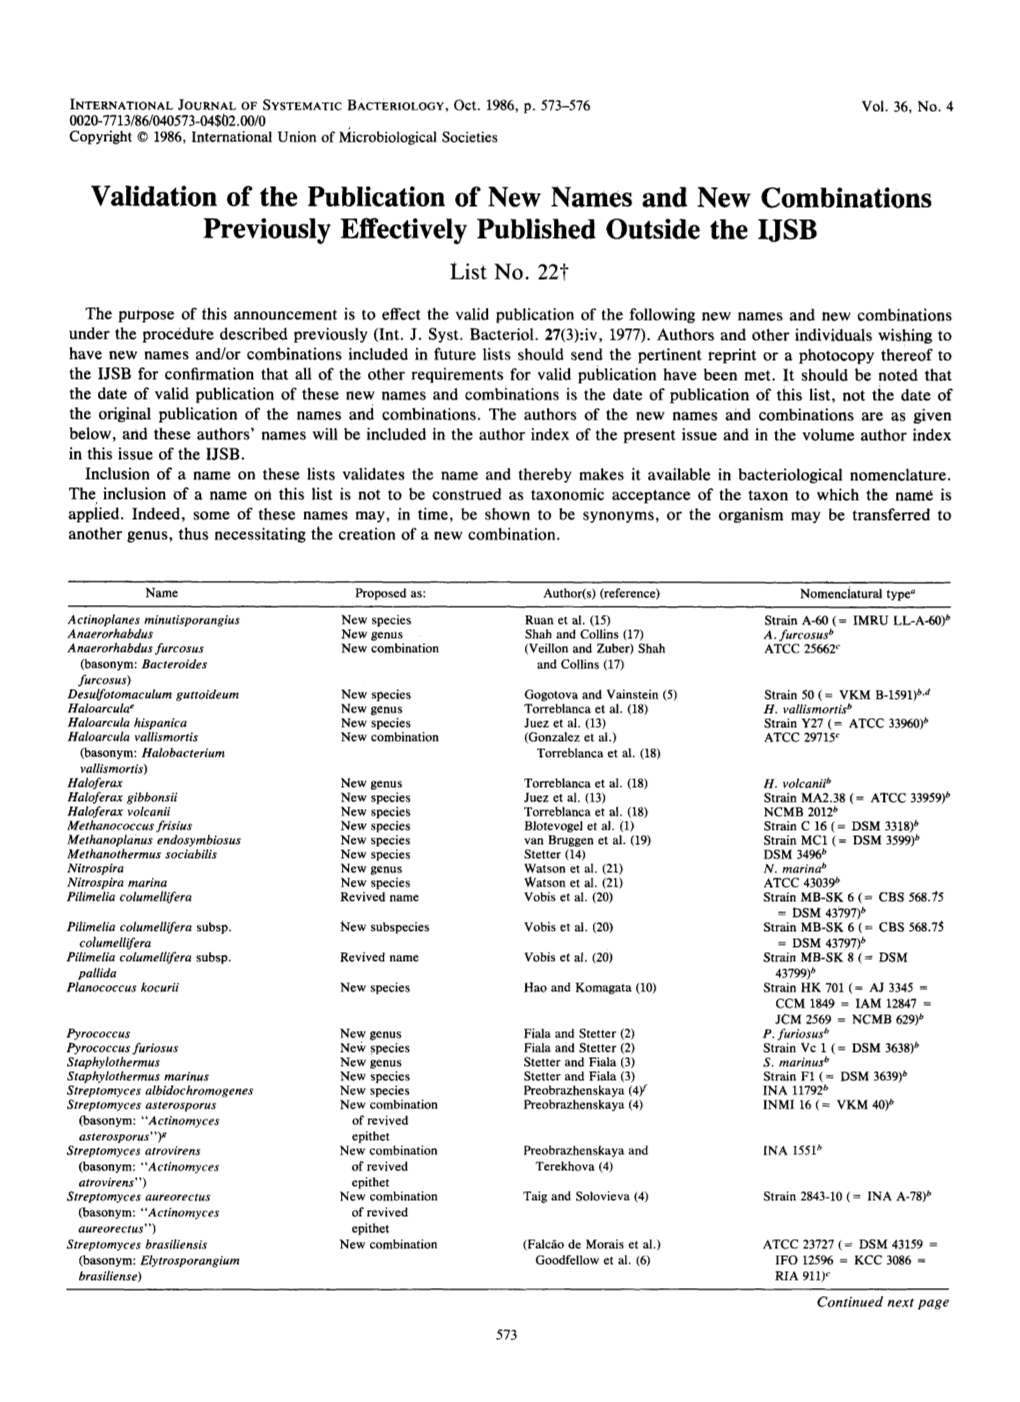 Validation of the Publication of New Names and New Combinations Previously Effectively Published Outside the IJSB List No